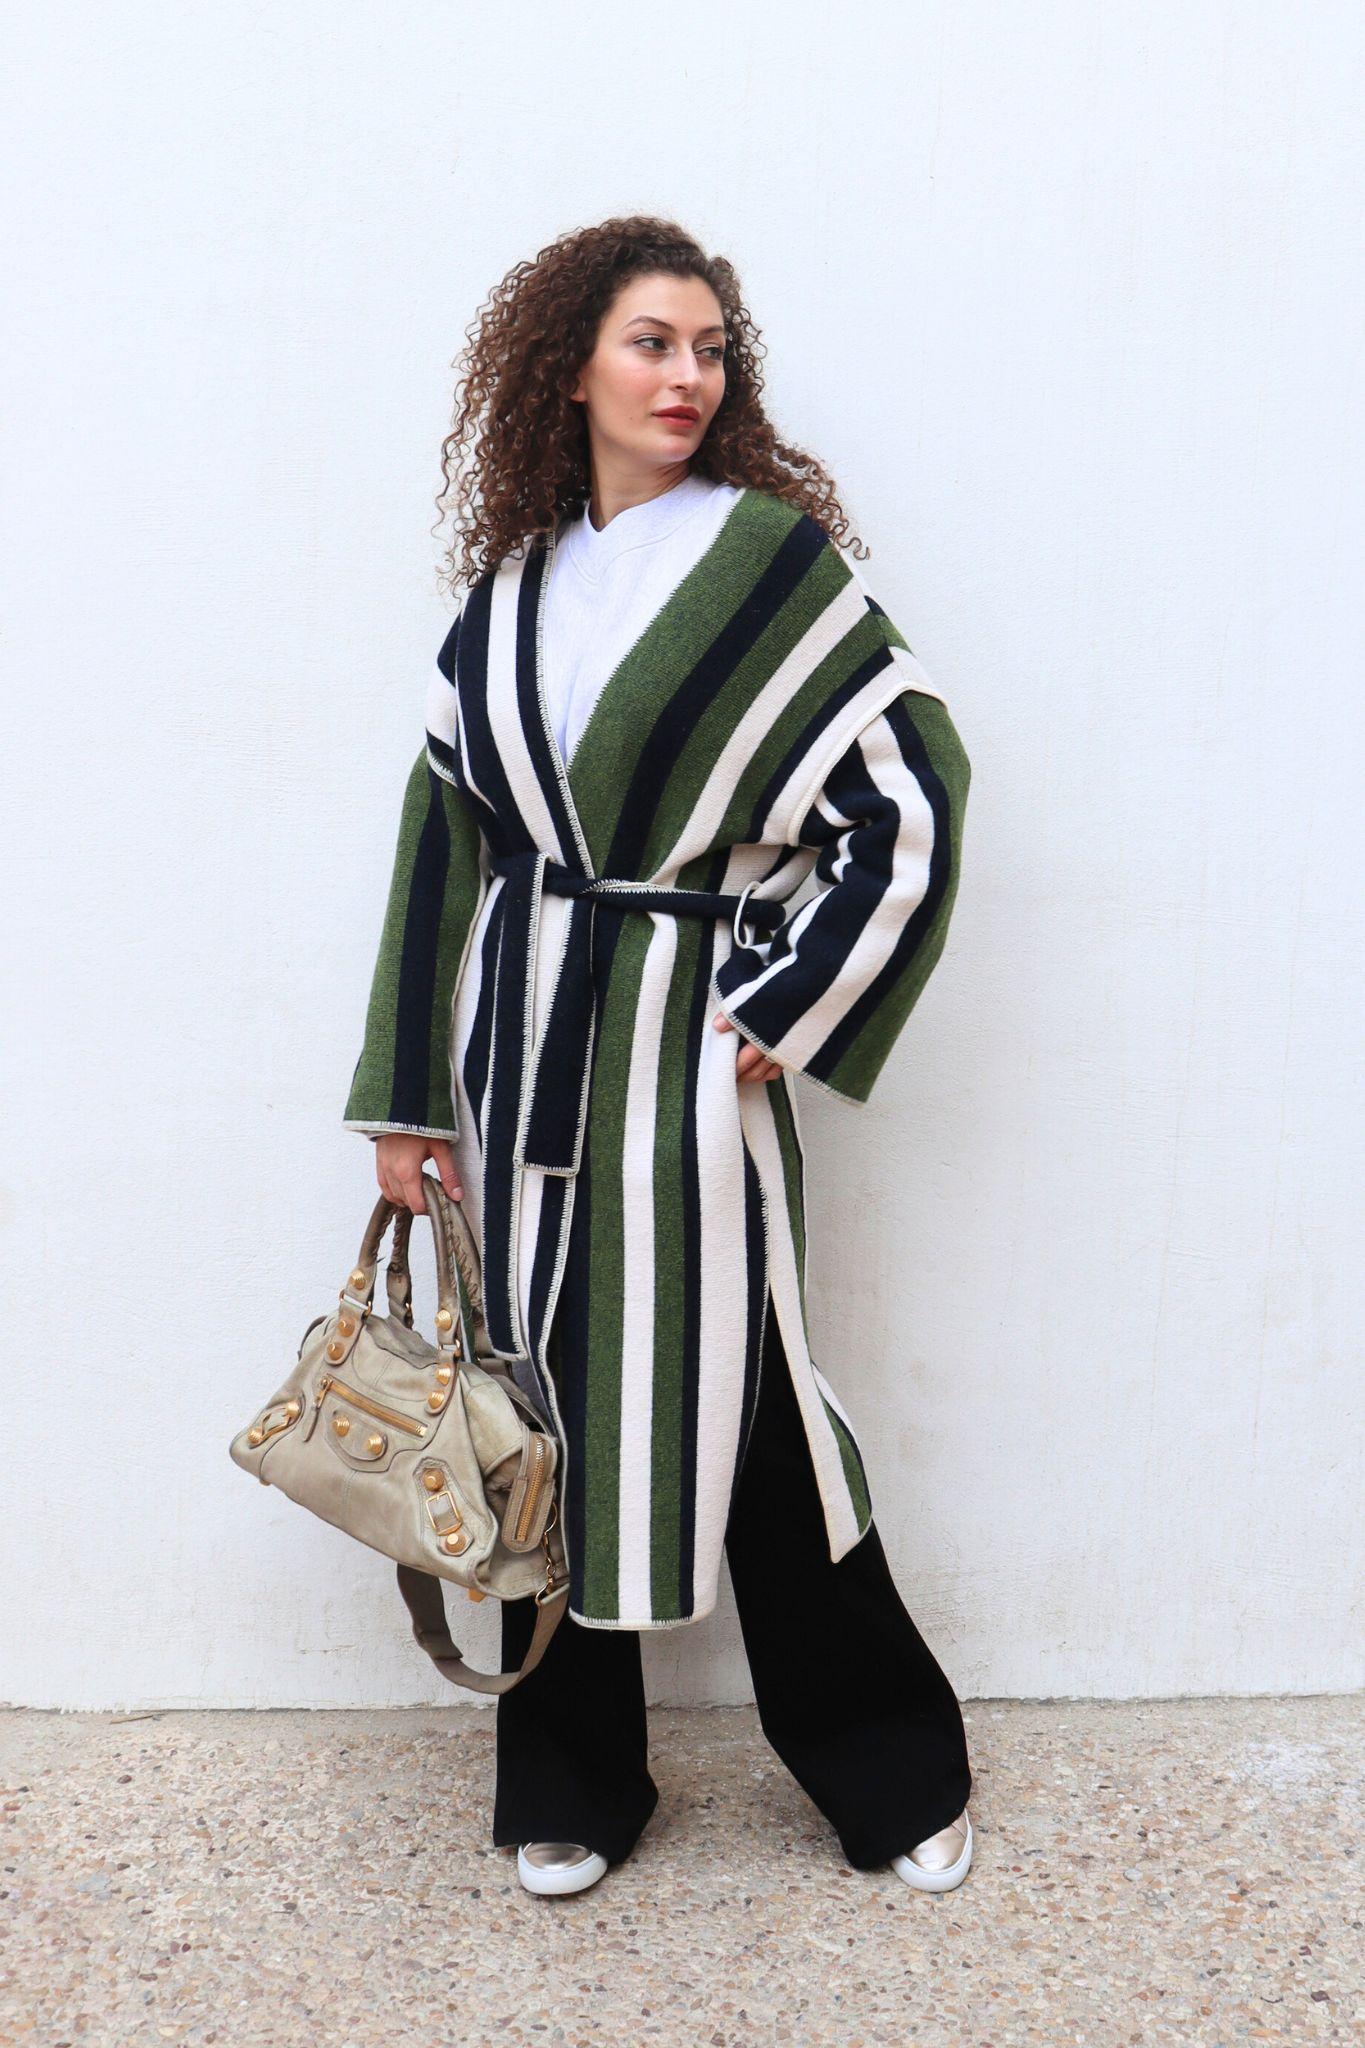 Oversized striped jacquard-knit wool-blend coat, Features a Jacquard-knit, Wool-blend, Two front patch pockets and a waist belt.
Material: 97% Wool 3% Polyamide
Size: IT 44 / Large
Bust: 94cm
Waist: 76cm
Hip: 101cm
Overall Condition: Excellent
